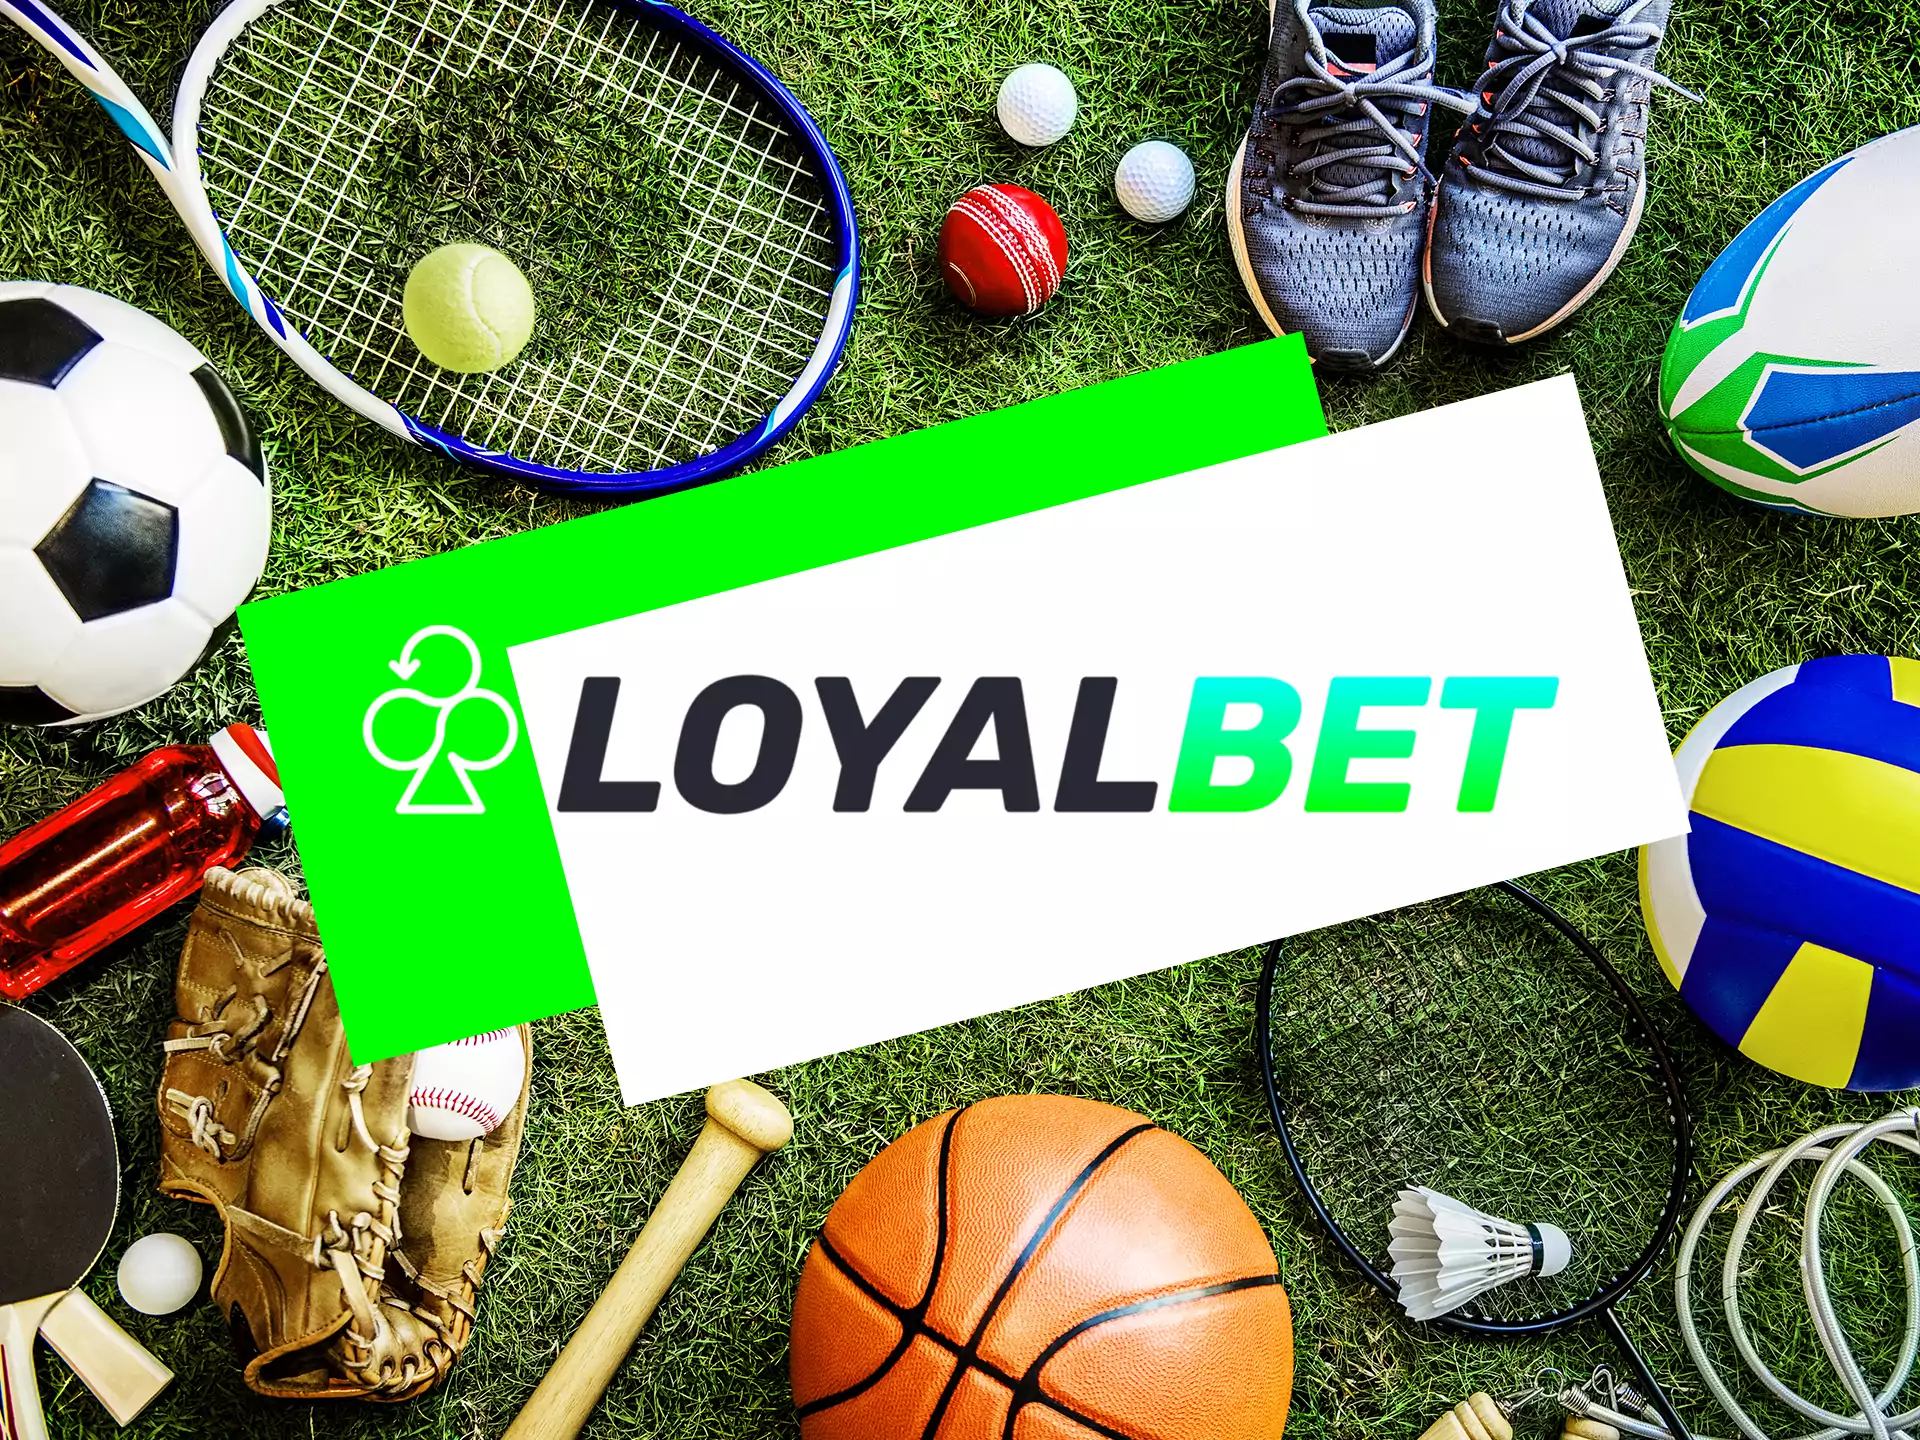 At Loyalbet you can bet on various sports.